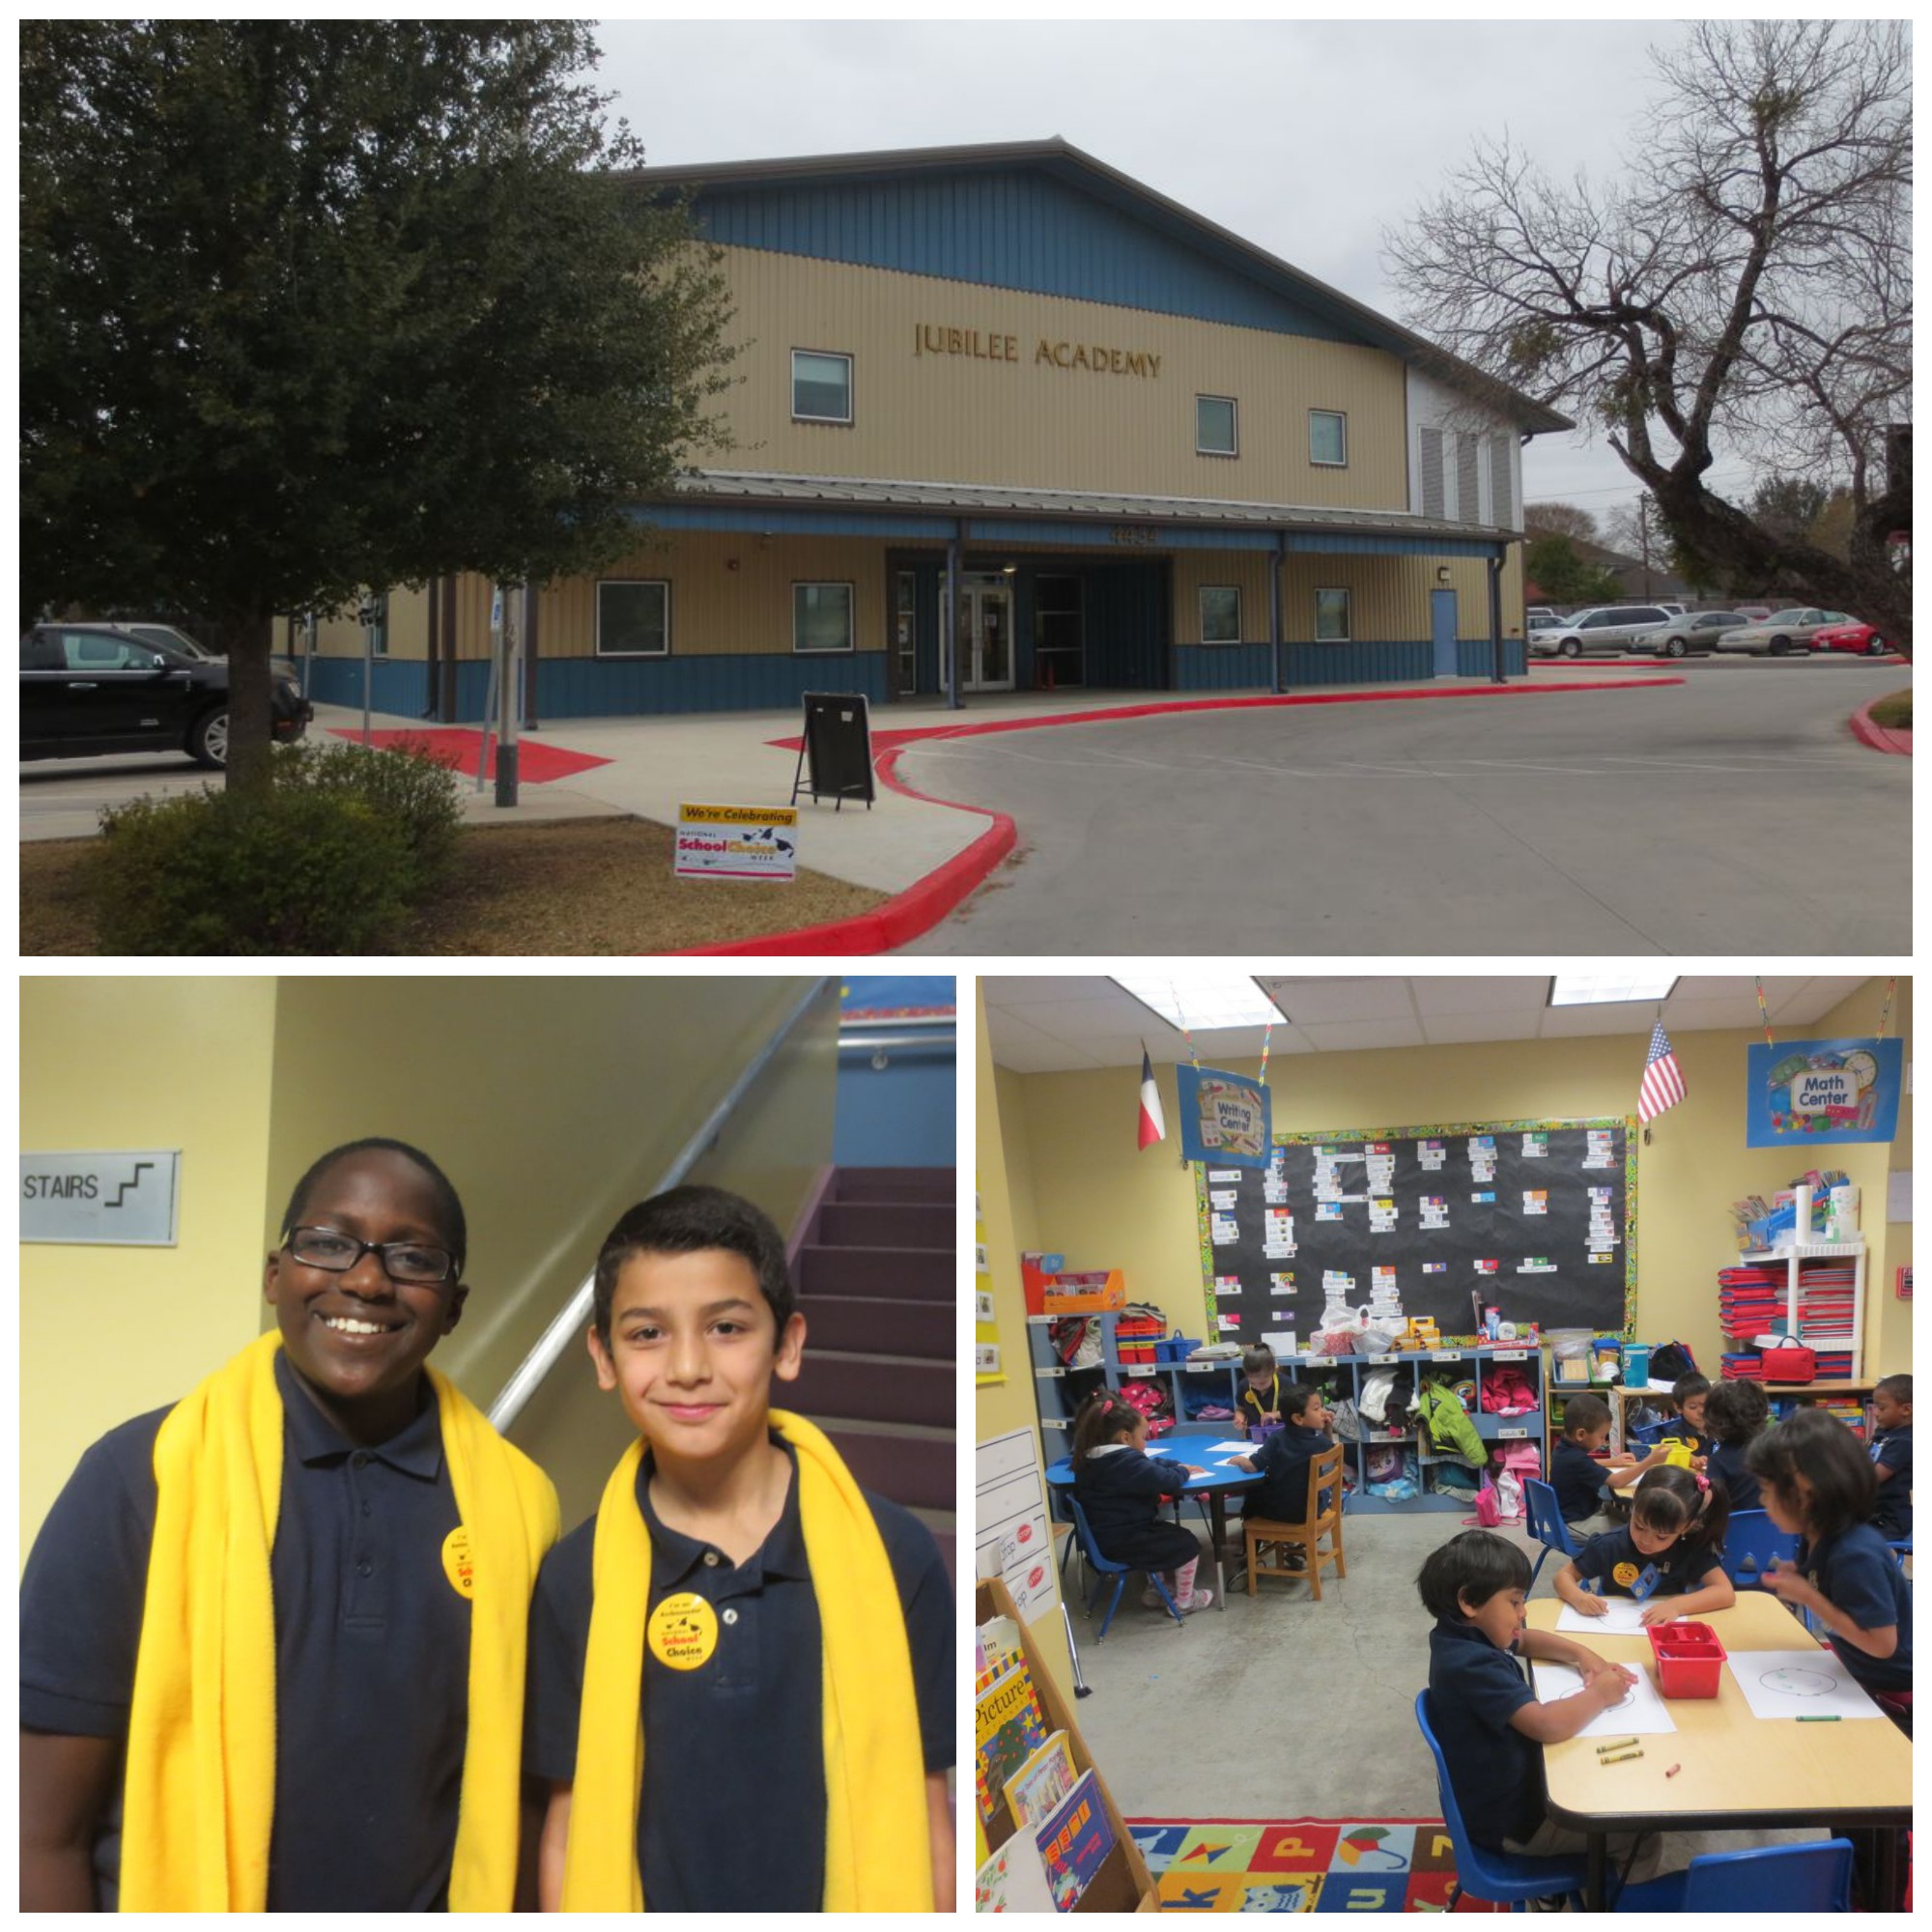 Jubilee Academy entrance, tour guides, and pre-K classroom | San Antonio Charter Moms